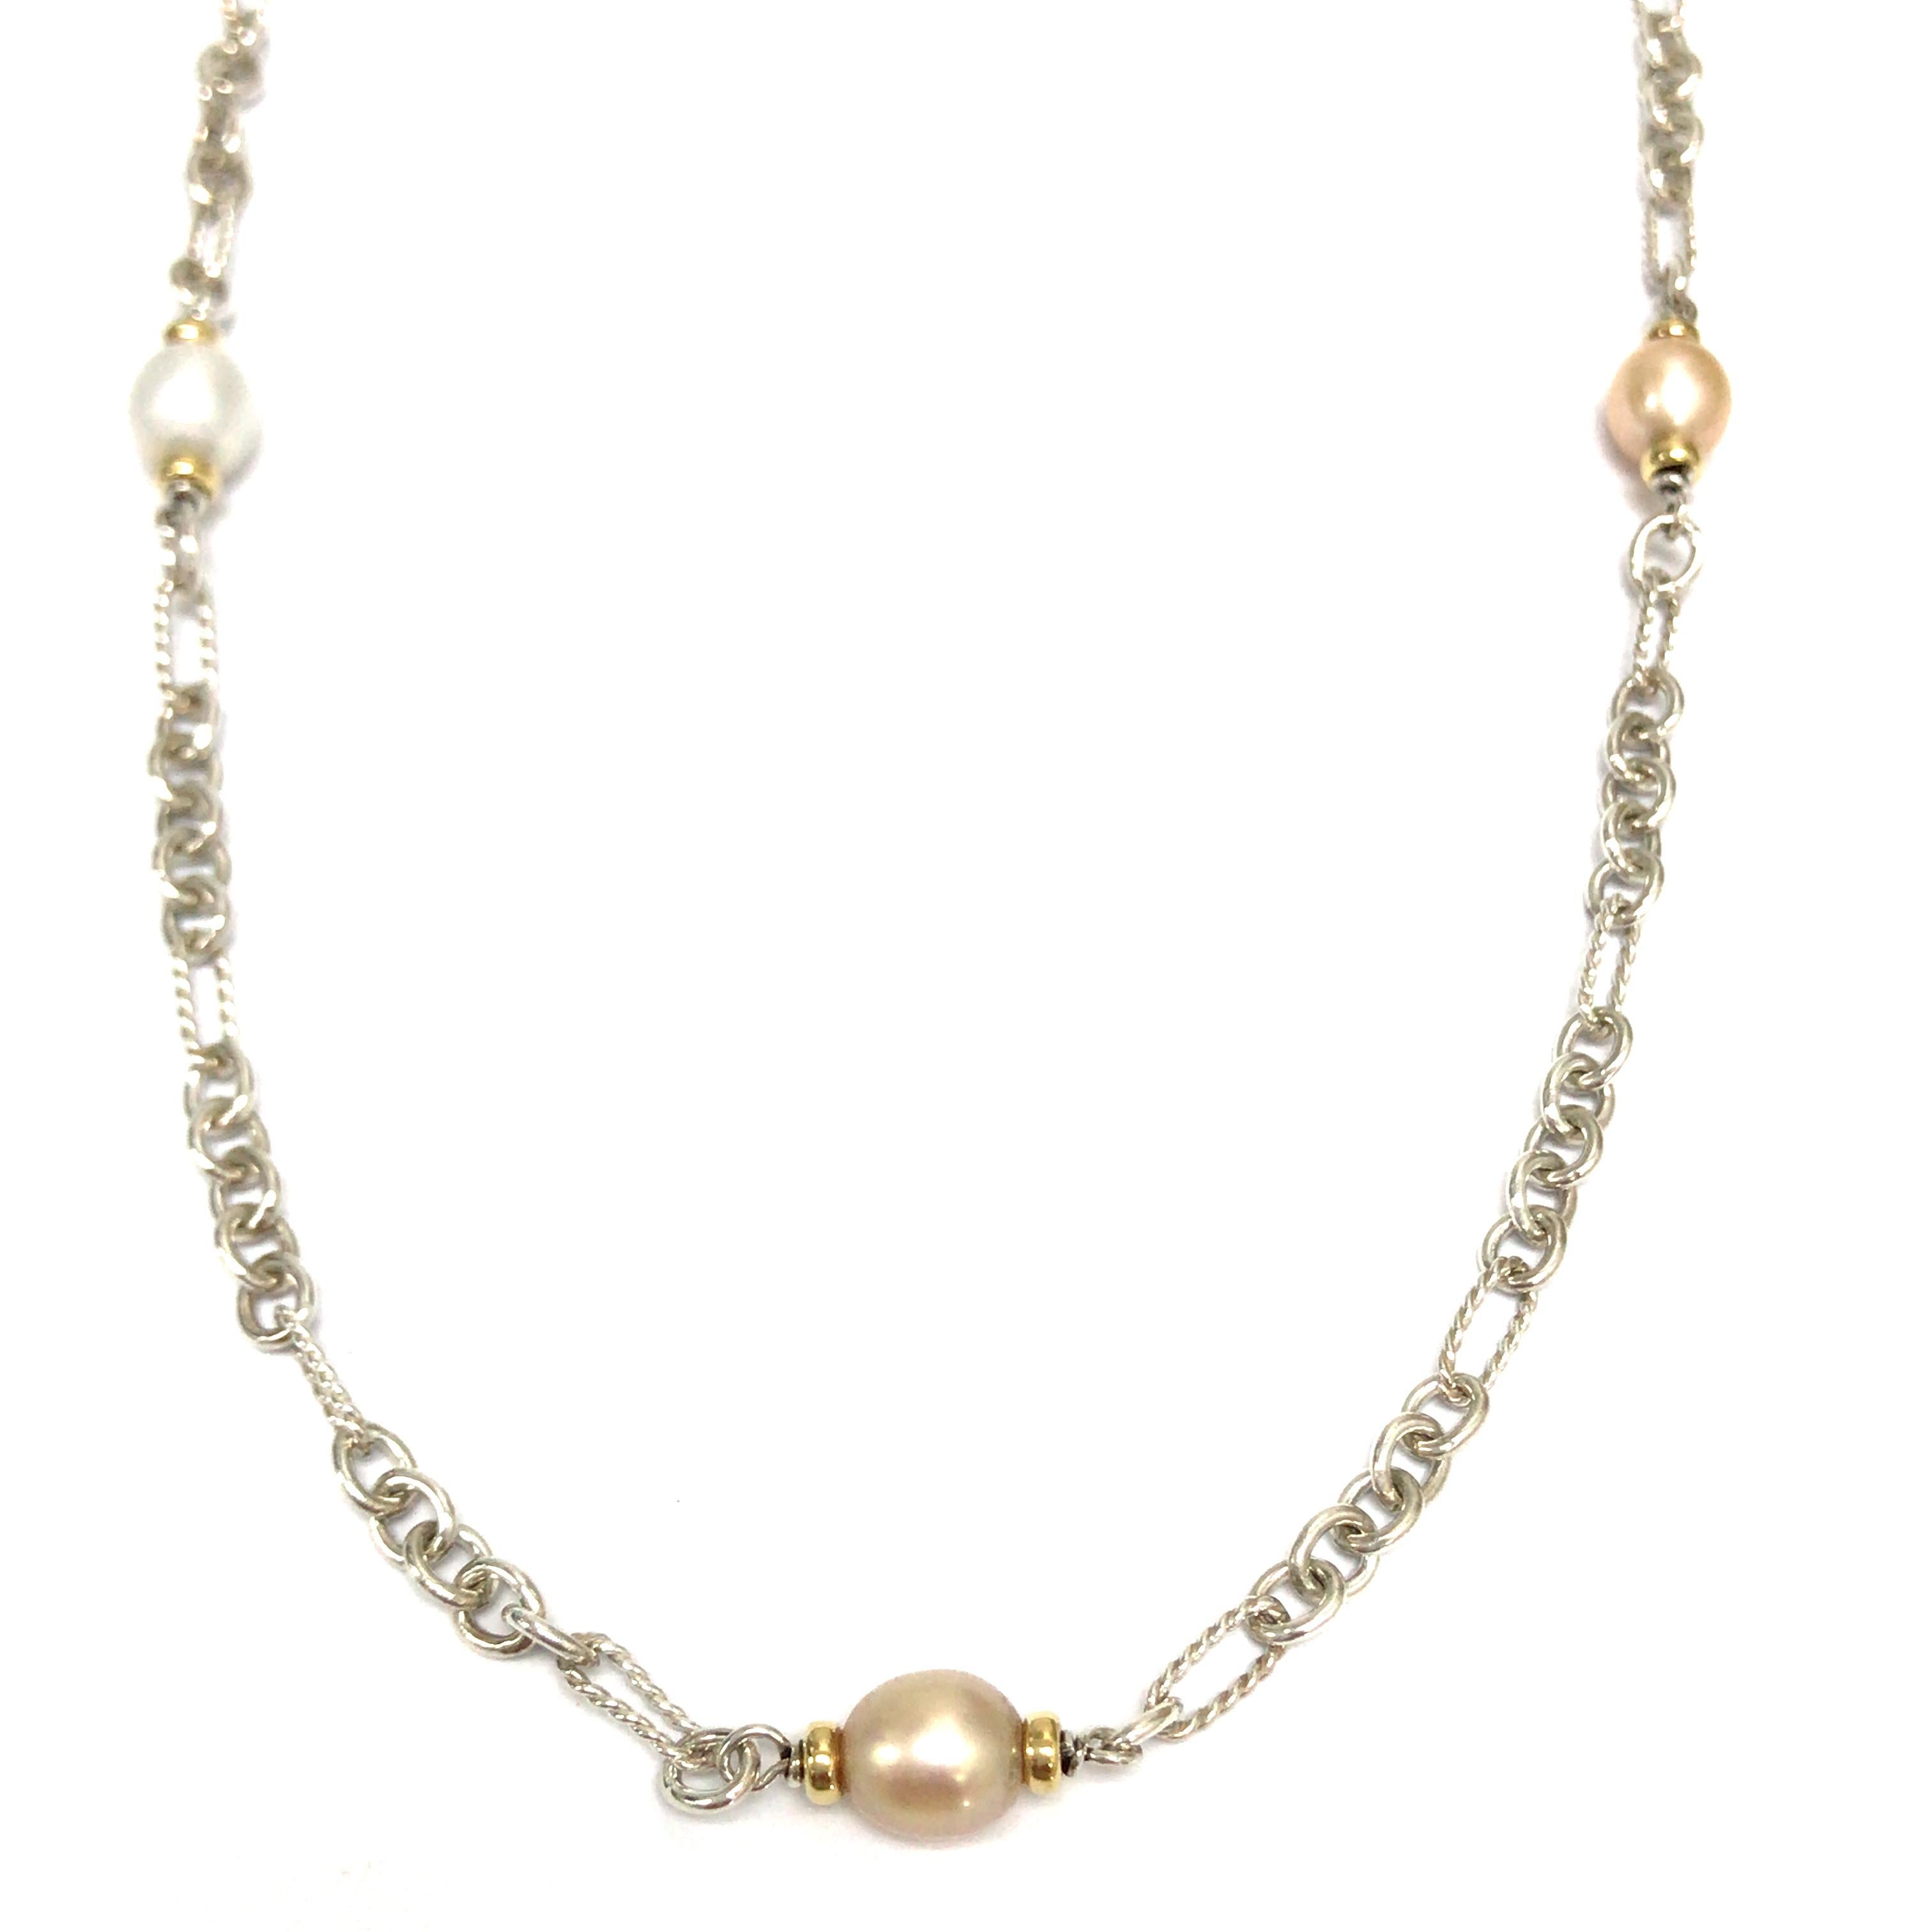 David Yurman Link Pearl Necklace in 18K Yellow Gold and Silver. (7) Multi Color Pearls are stationed approximately 4 1/2 inches apart on the 35 1/2 inch in length with a toggle closure.  Stamped 